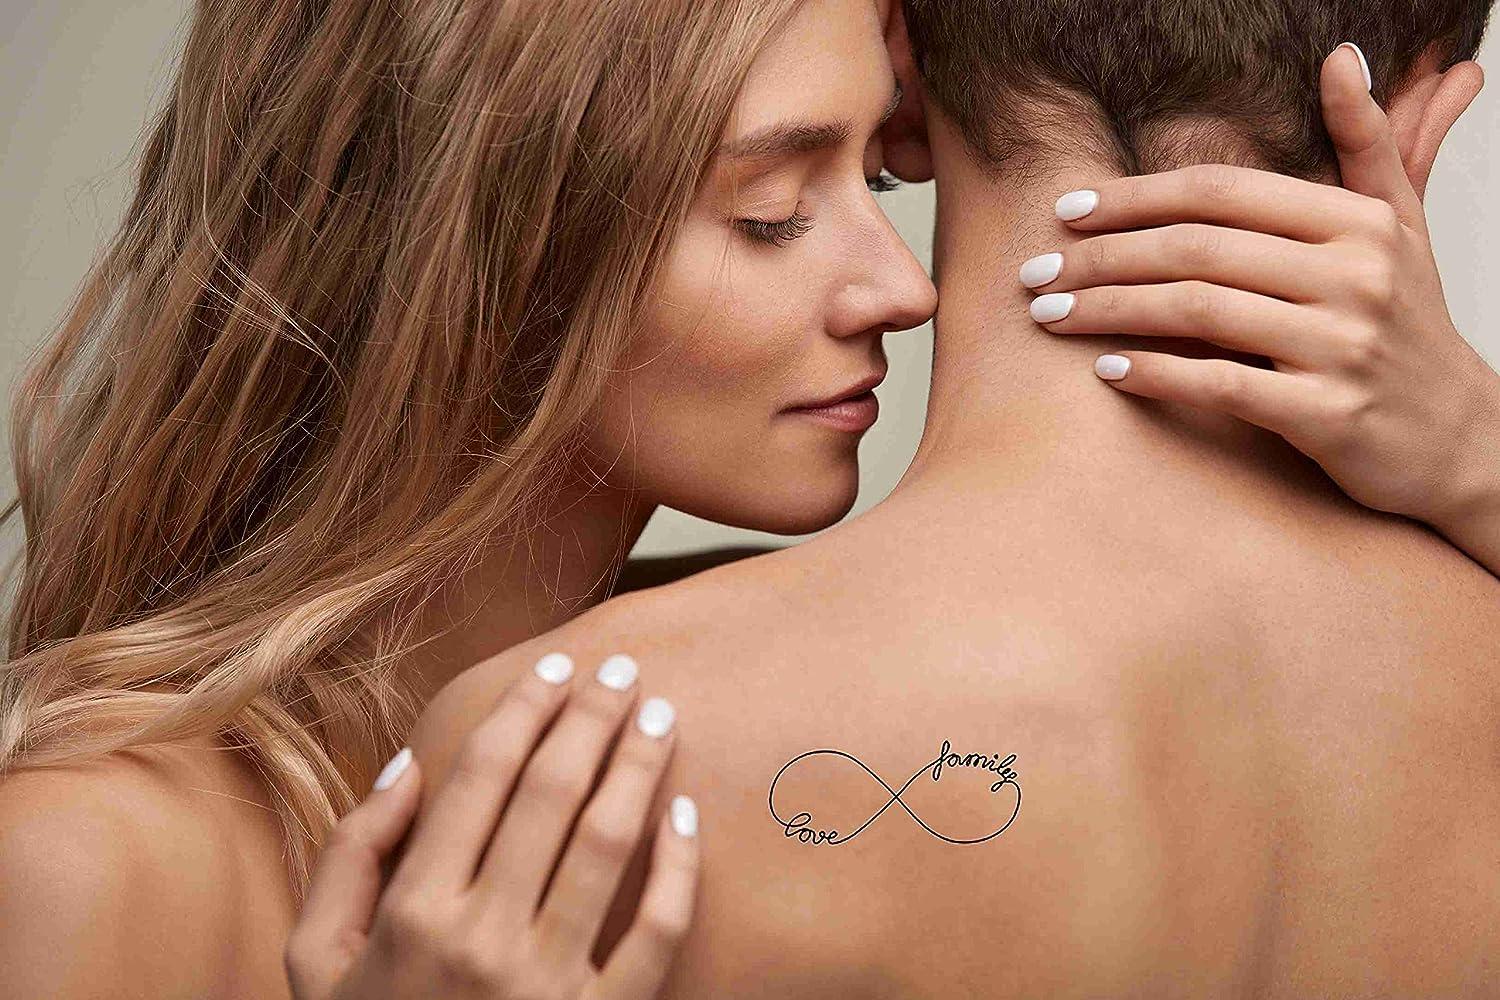 You and Me - Entwined in Infinity - Temporary Tattoo